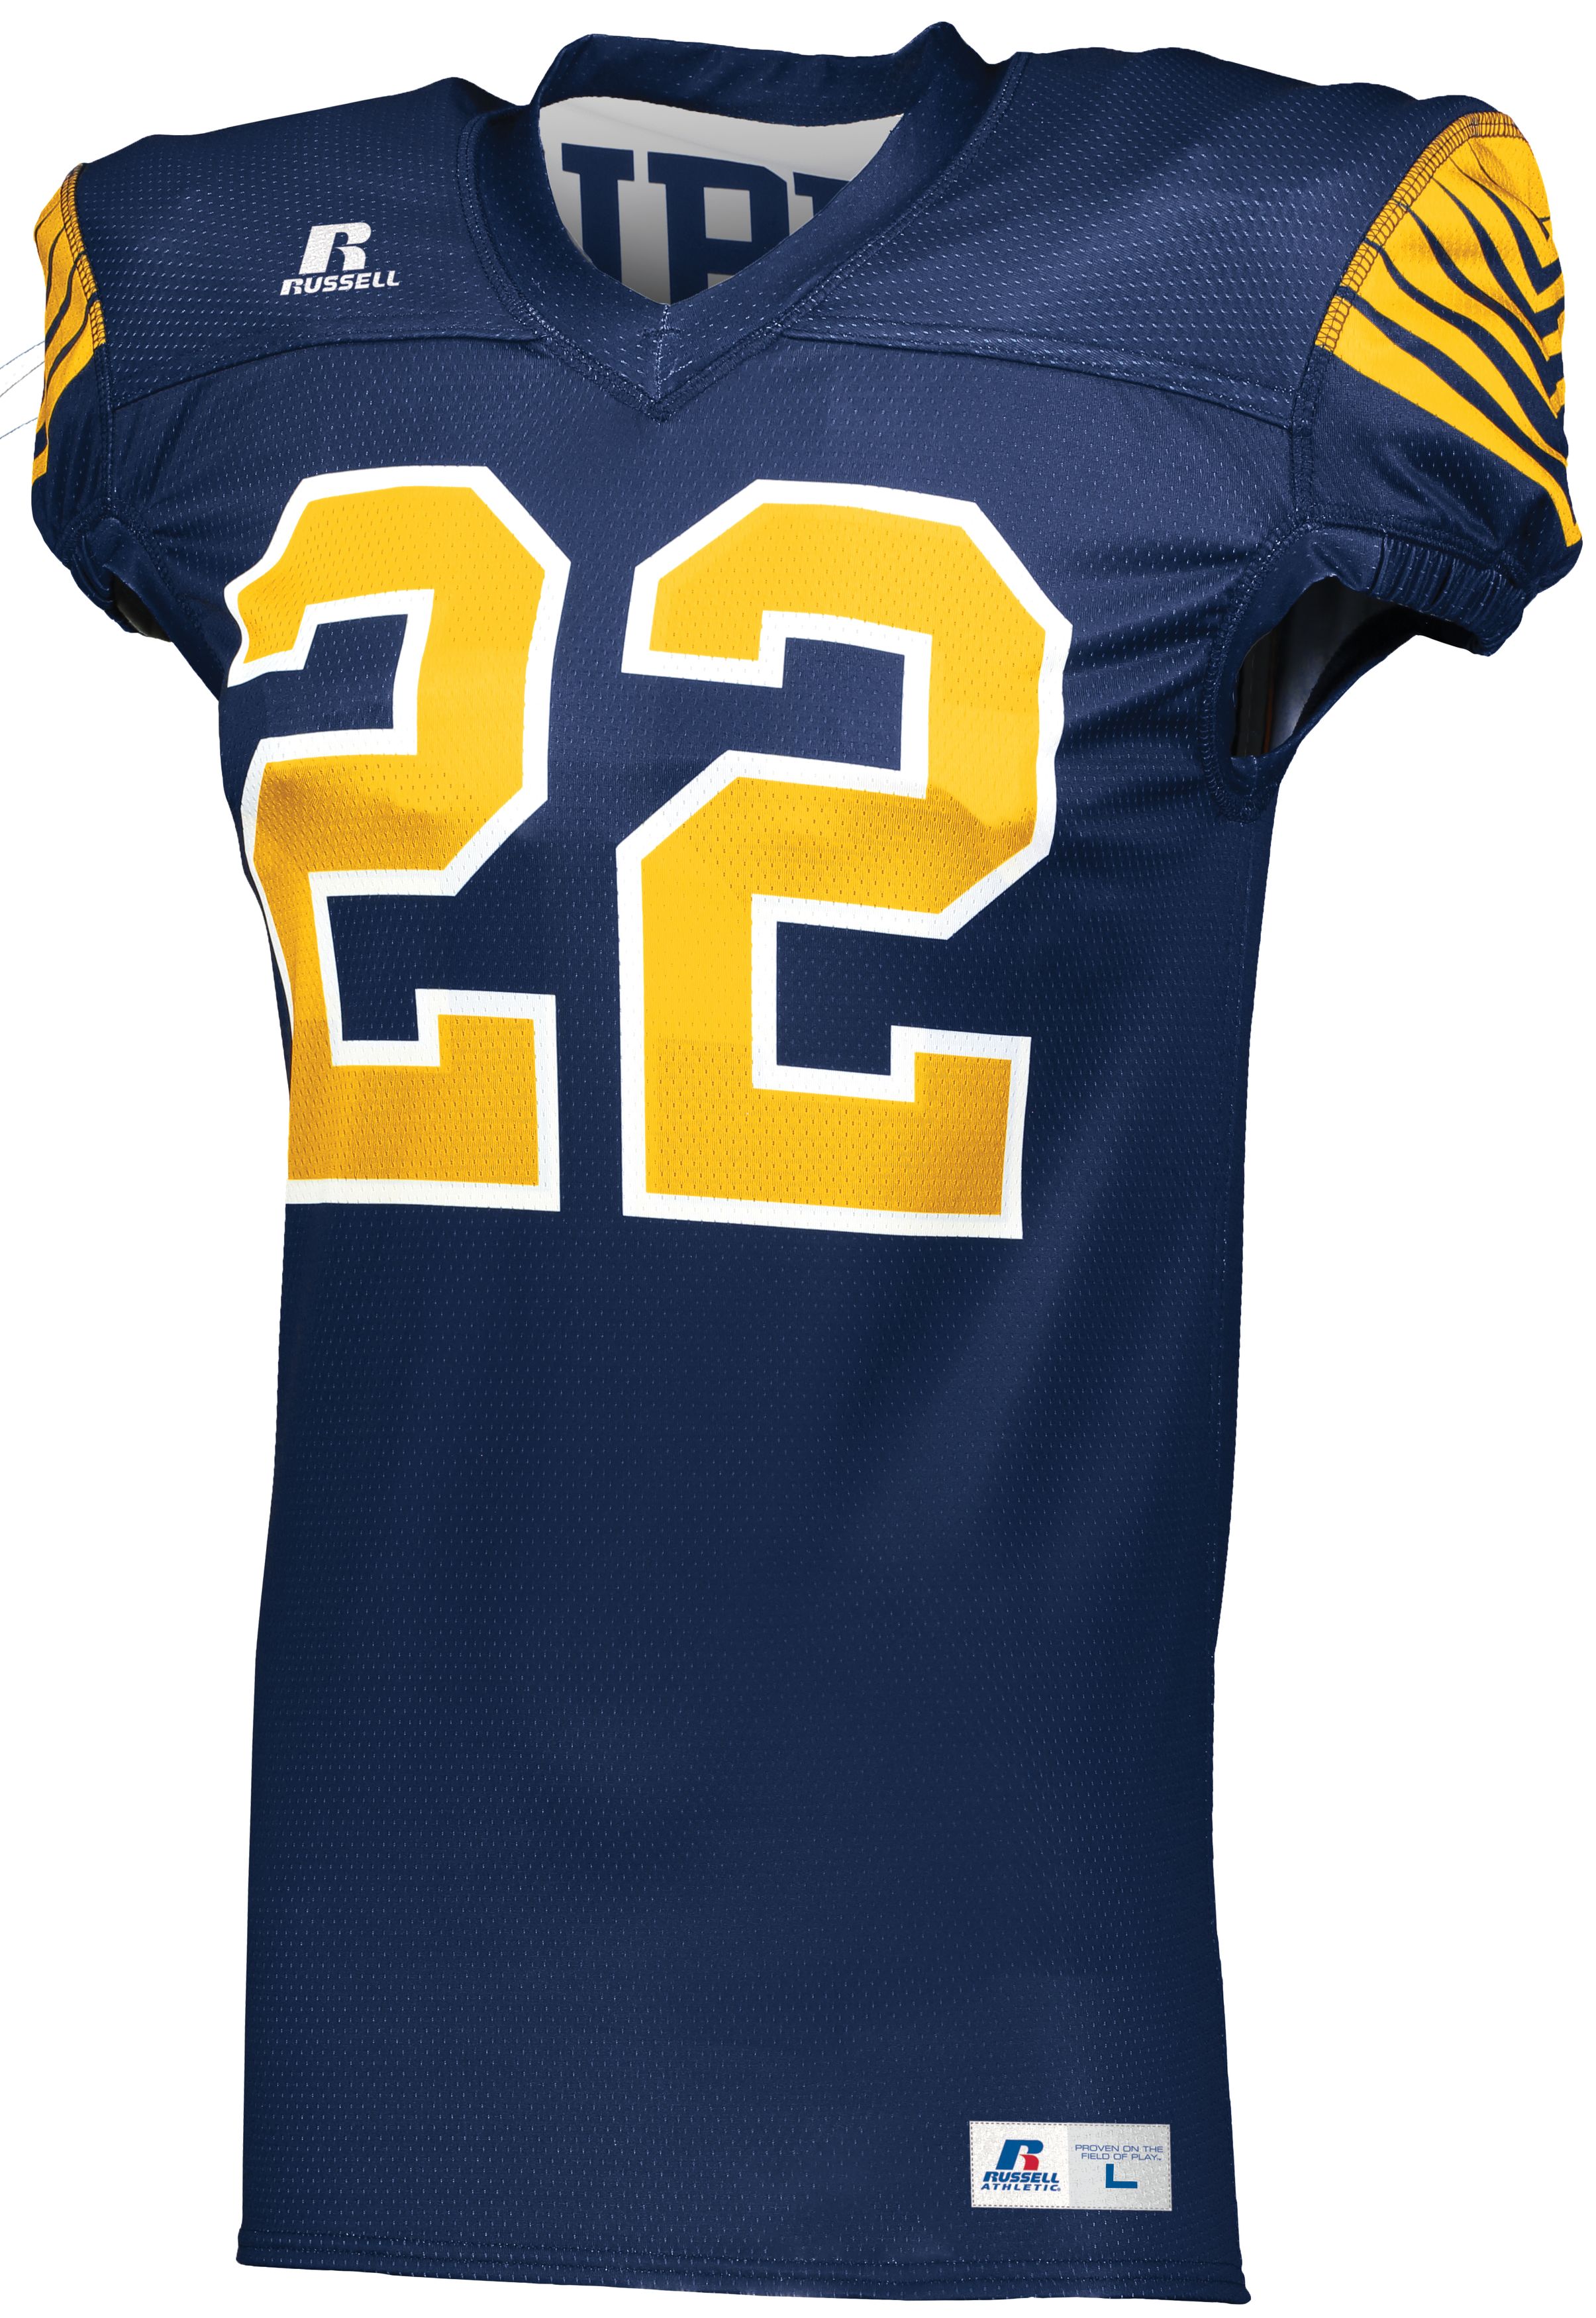 Russell Sublimated Reversible FB Jersey